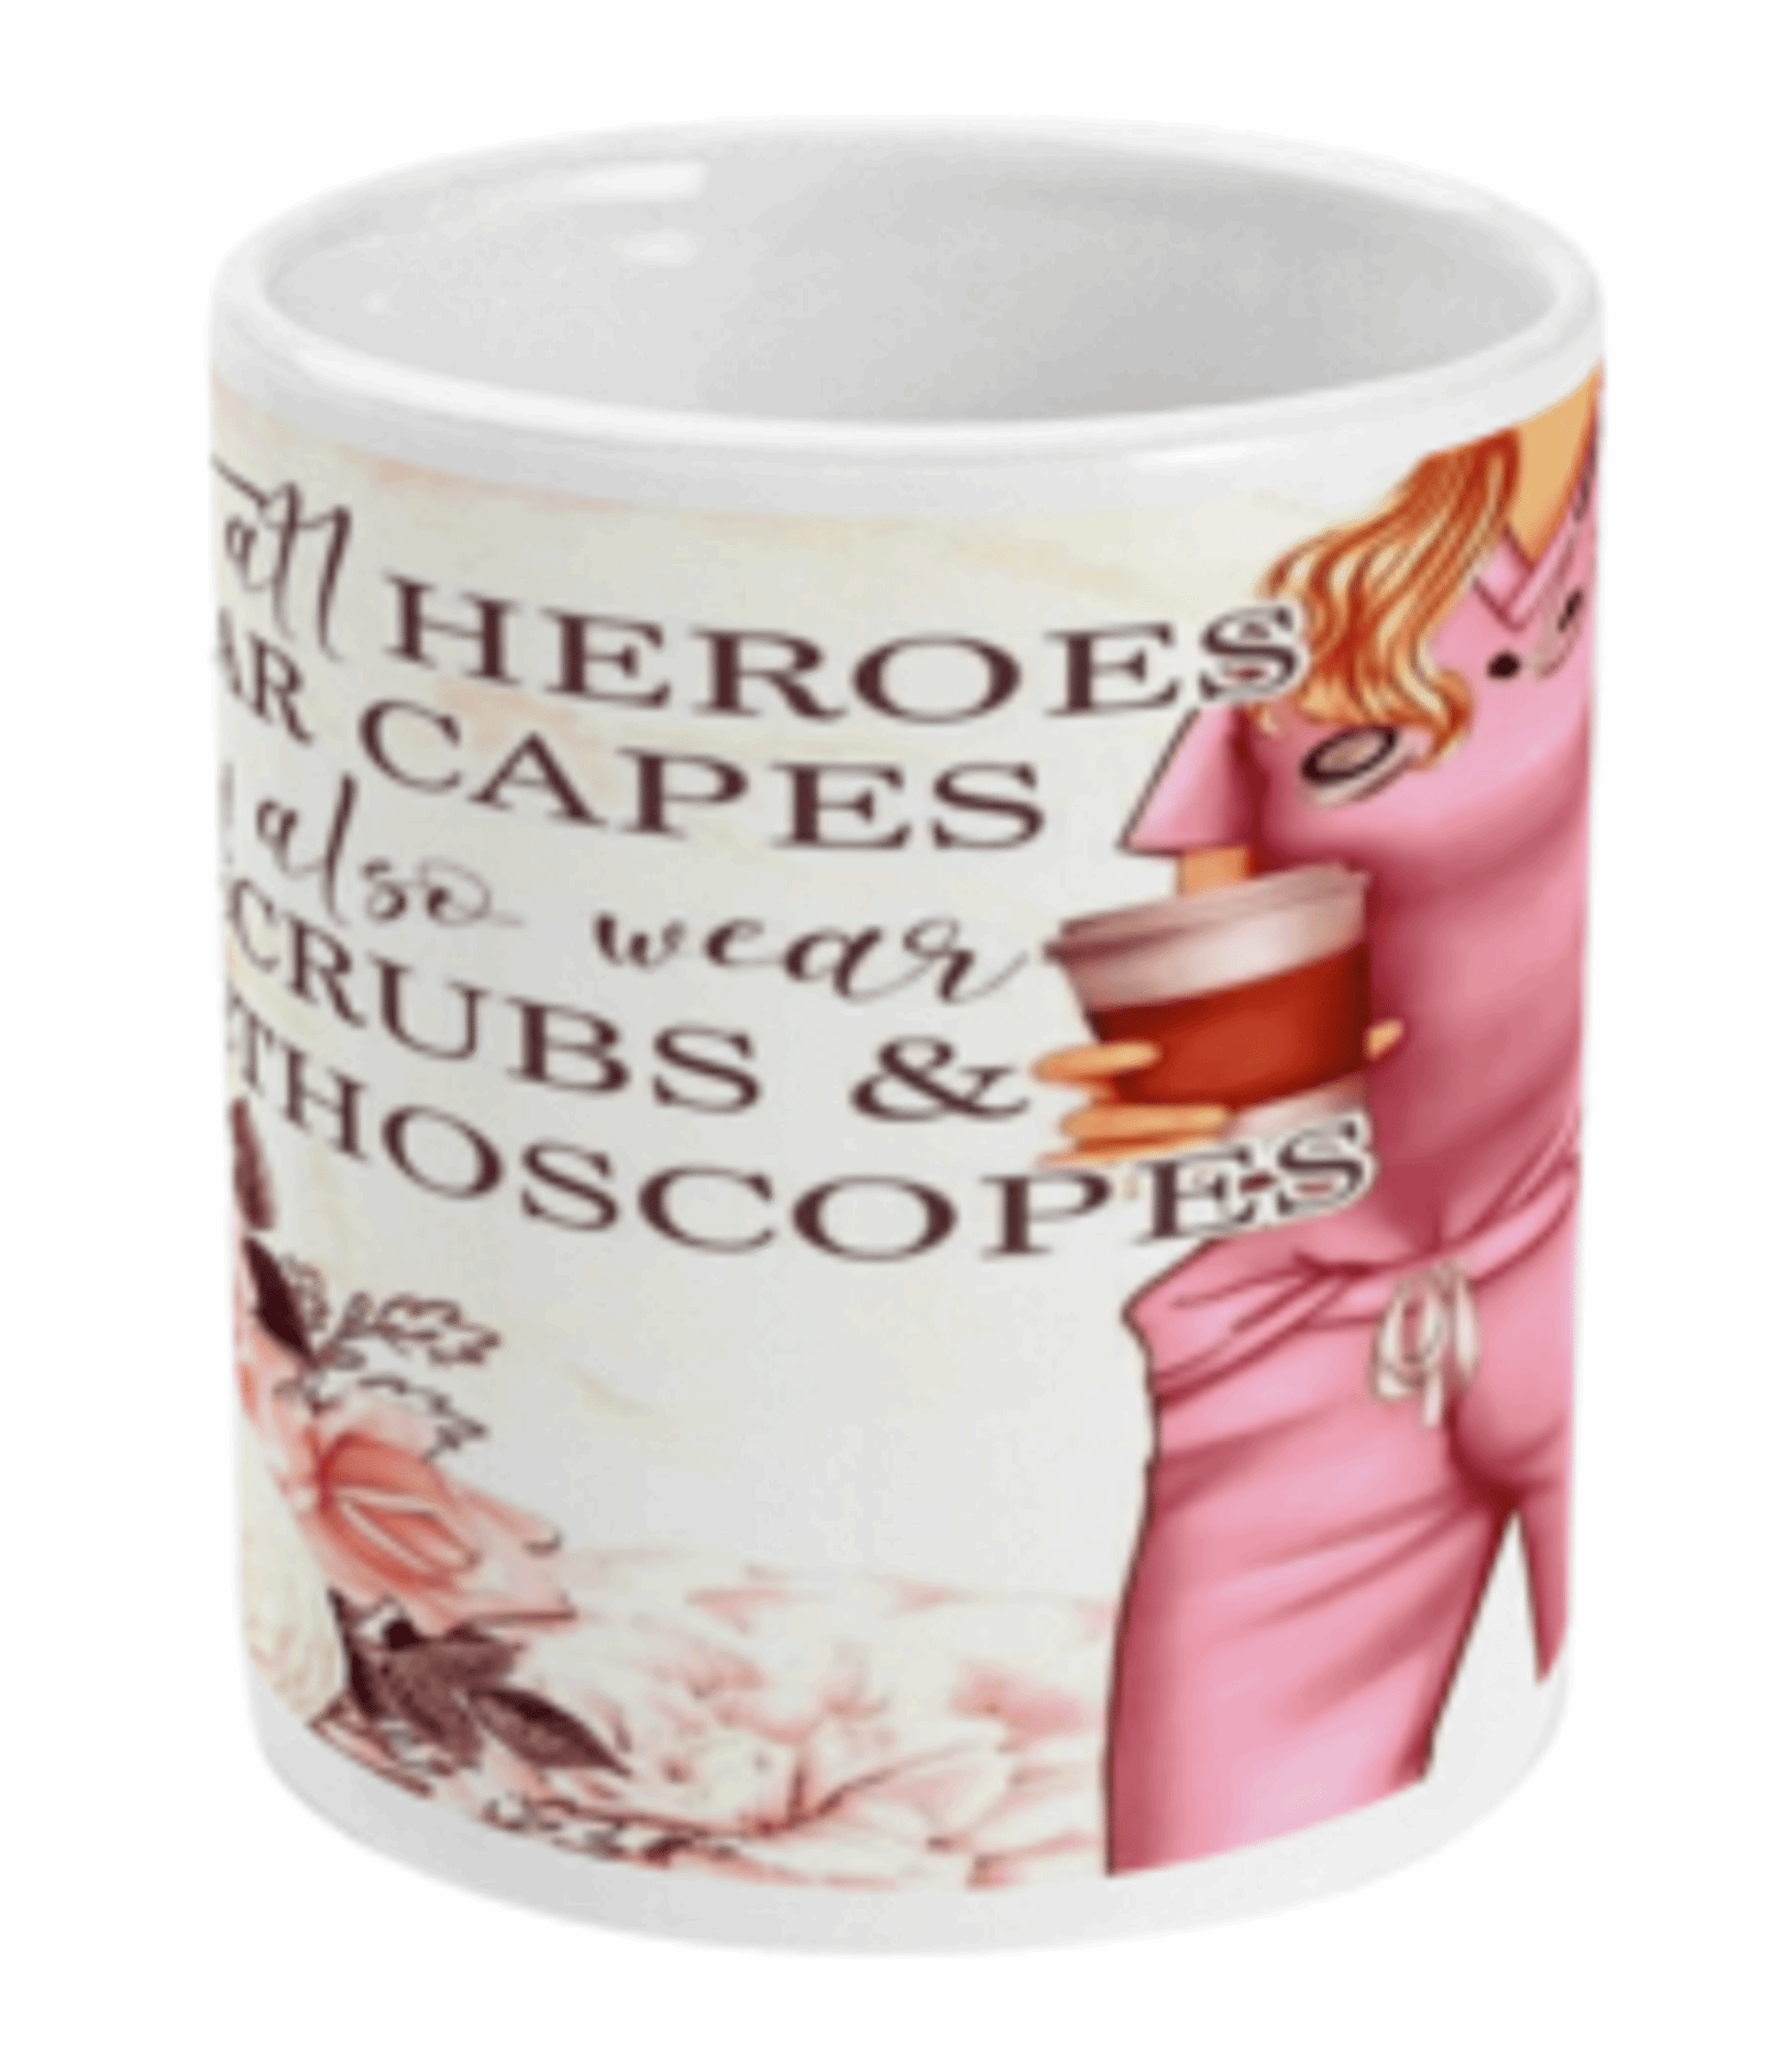  Not all Heroes Wear Capes Coffee Mug by Free Spirit Accessories sold by Free Spirit Accessories